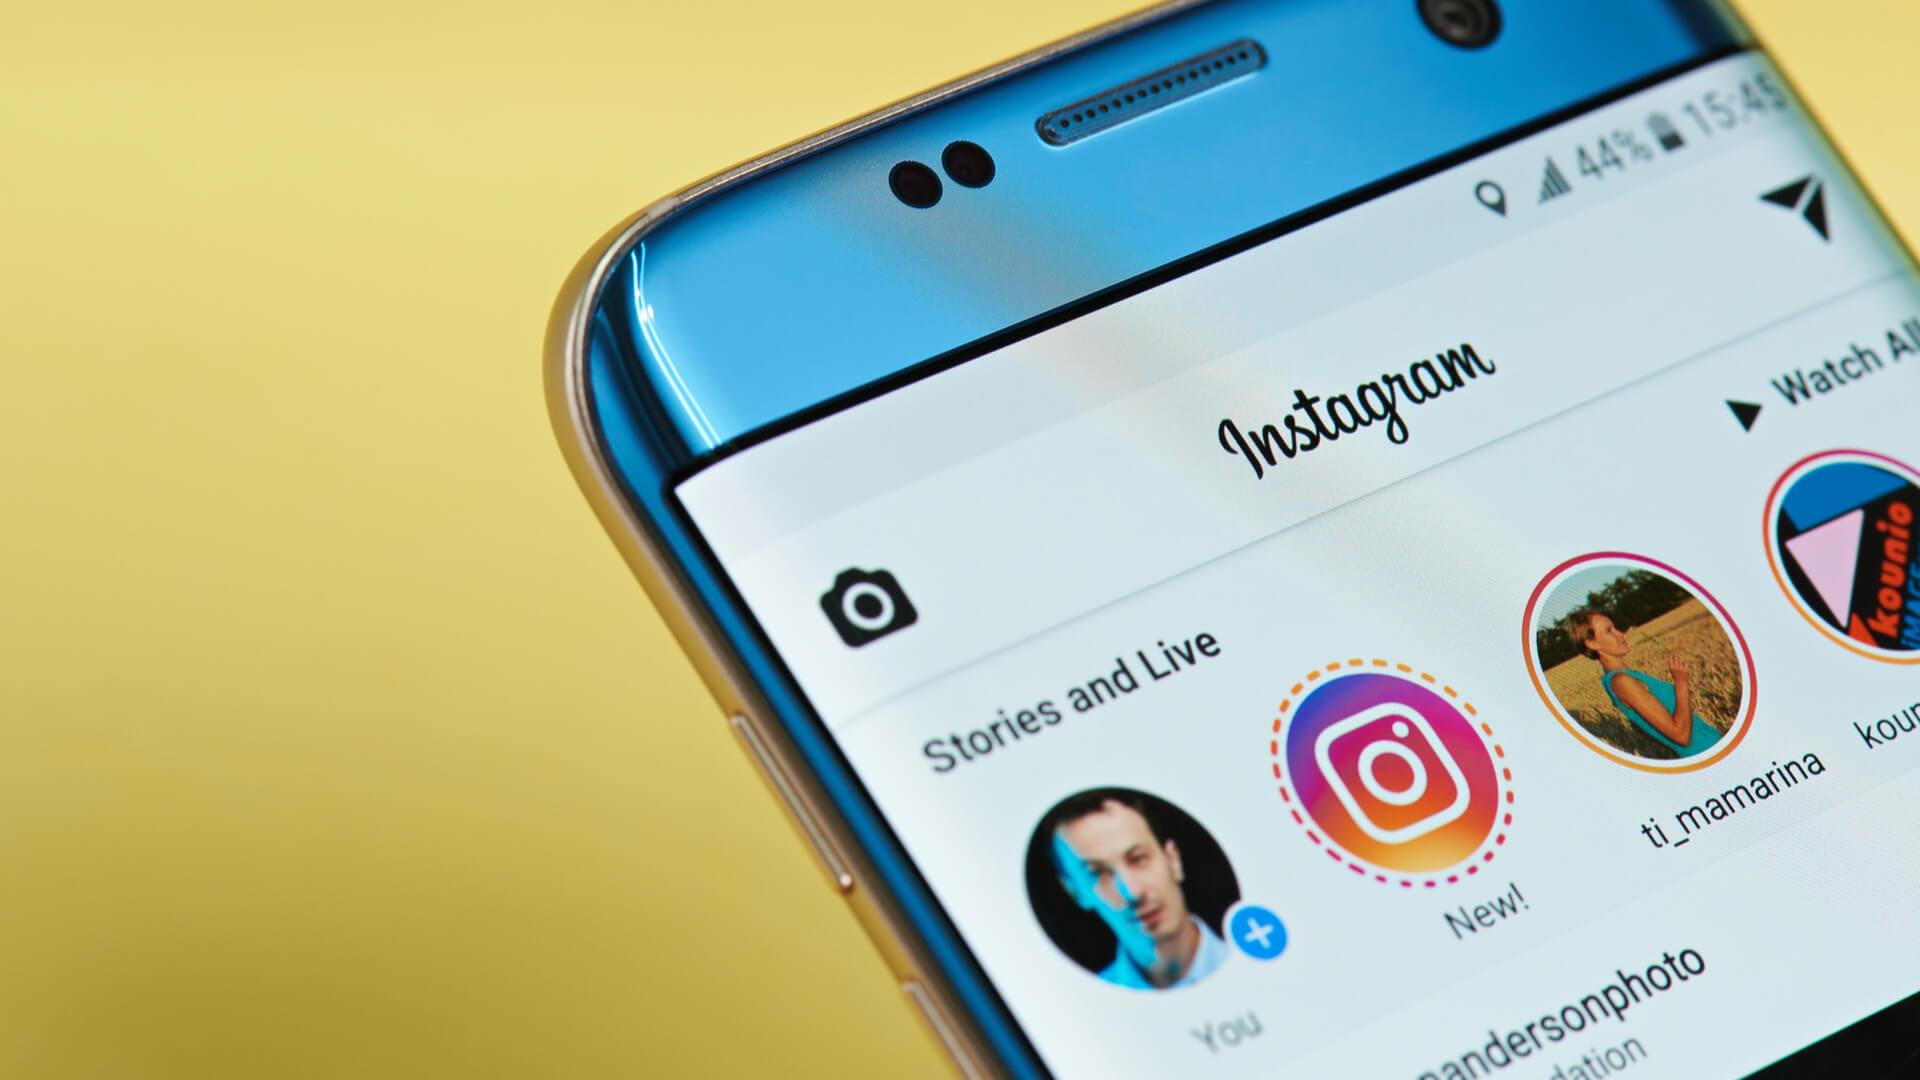 Instagram confirms it is testing increased ad loads in Stories